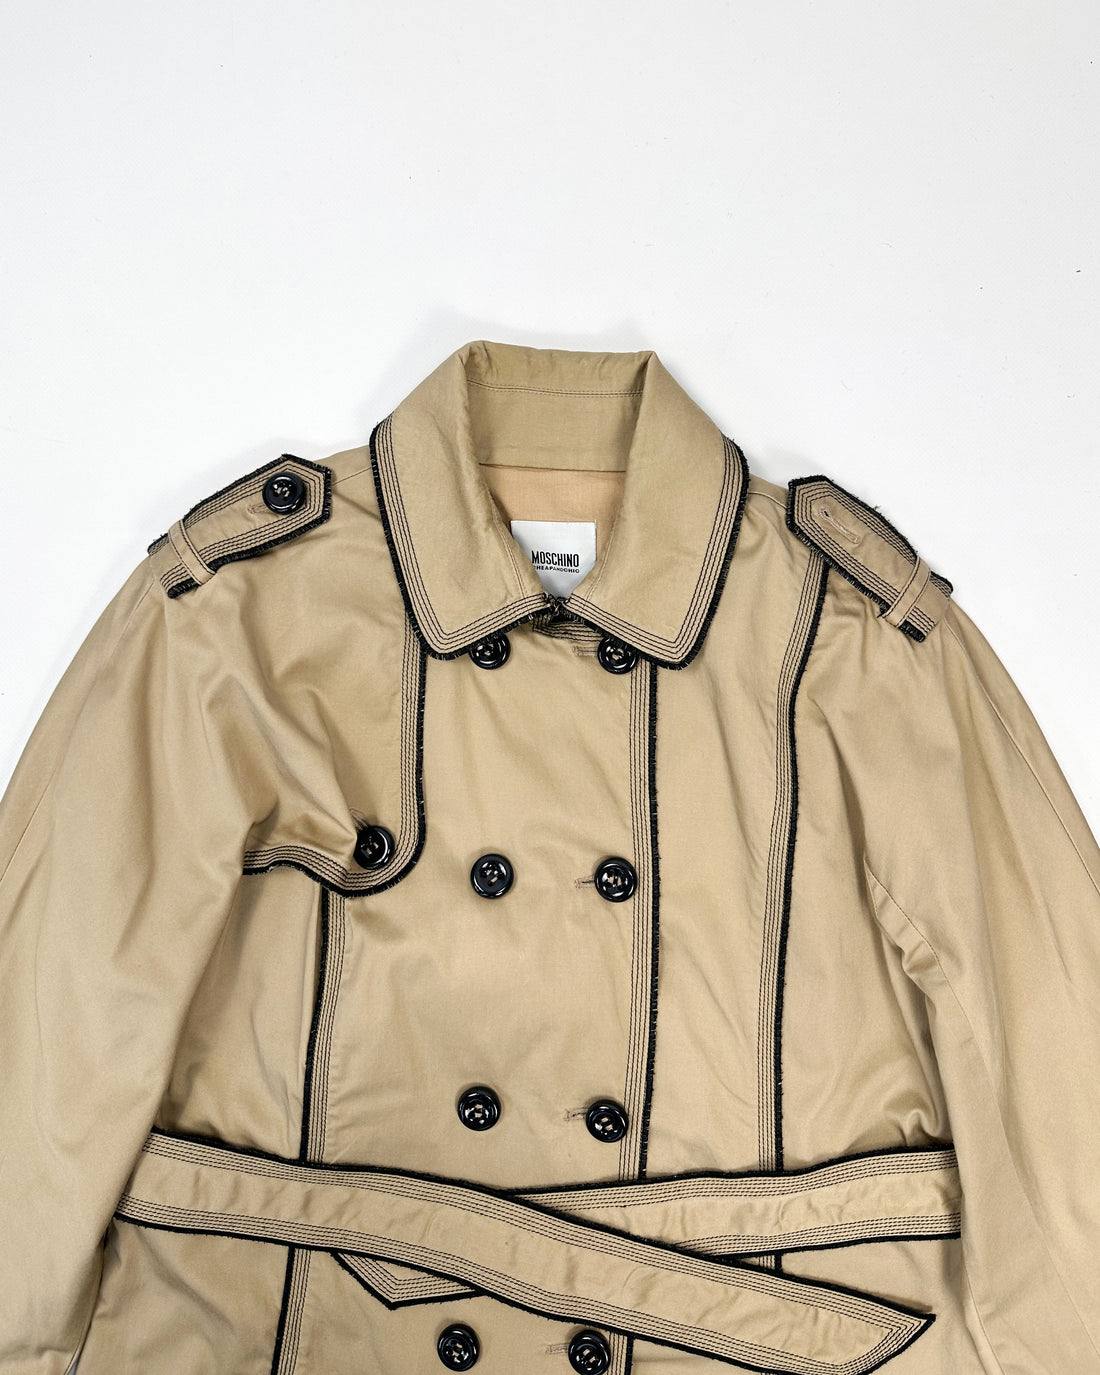 Moschino Buttoned Camel Trench Coat 1990's